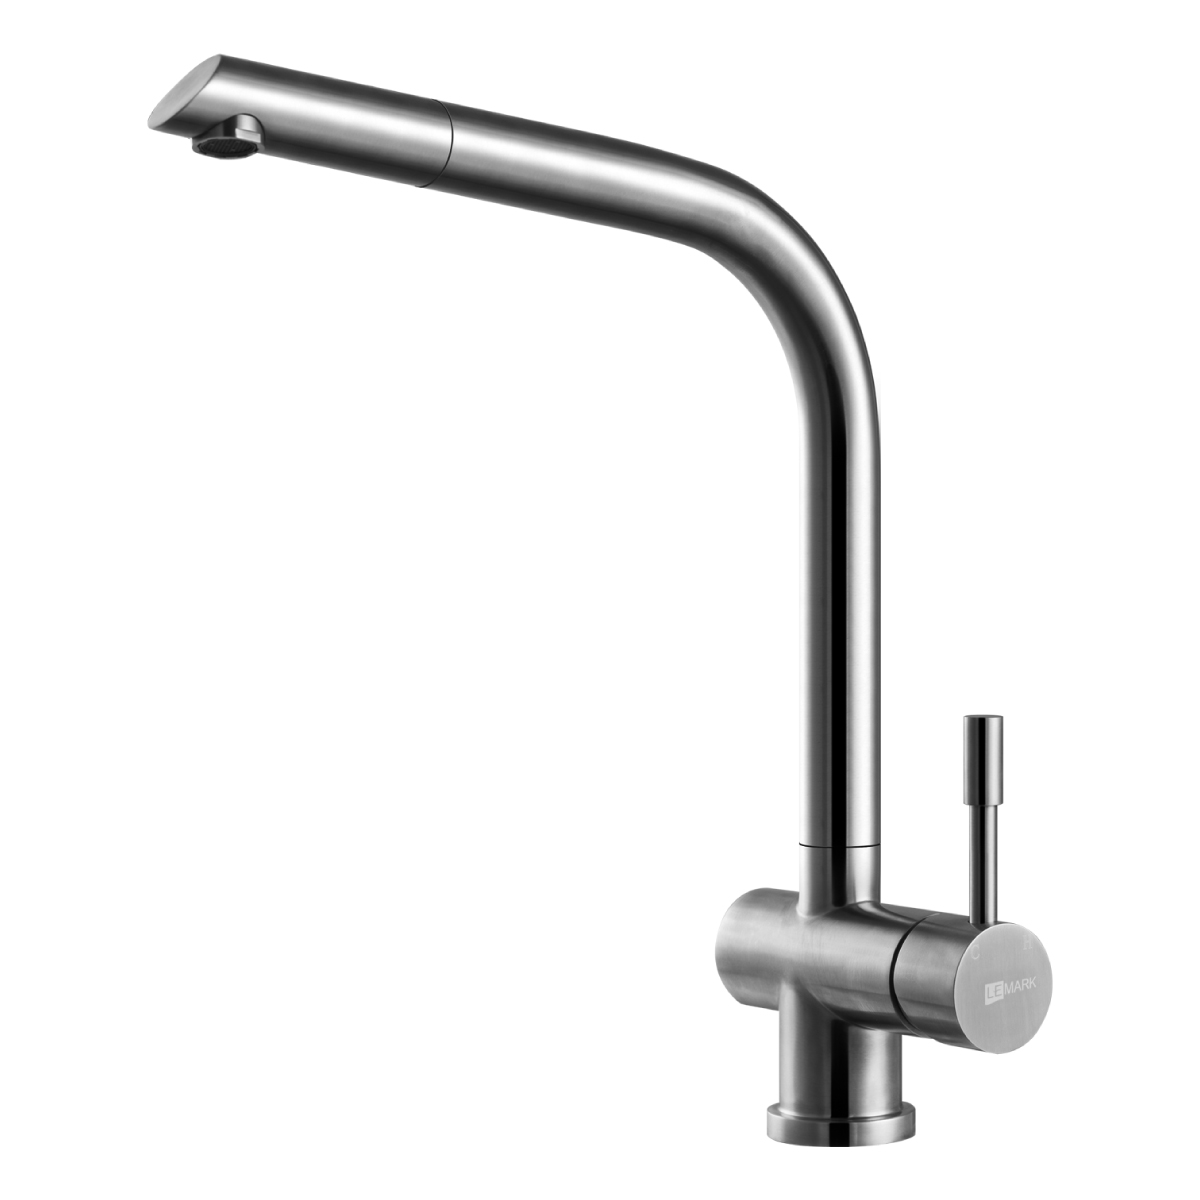 LM5075S Kitchen faucet
with pull-out swivel spout